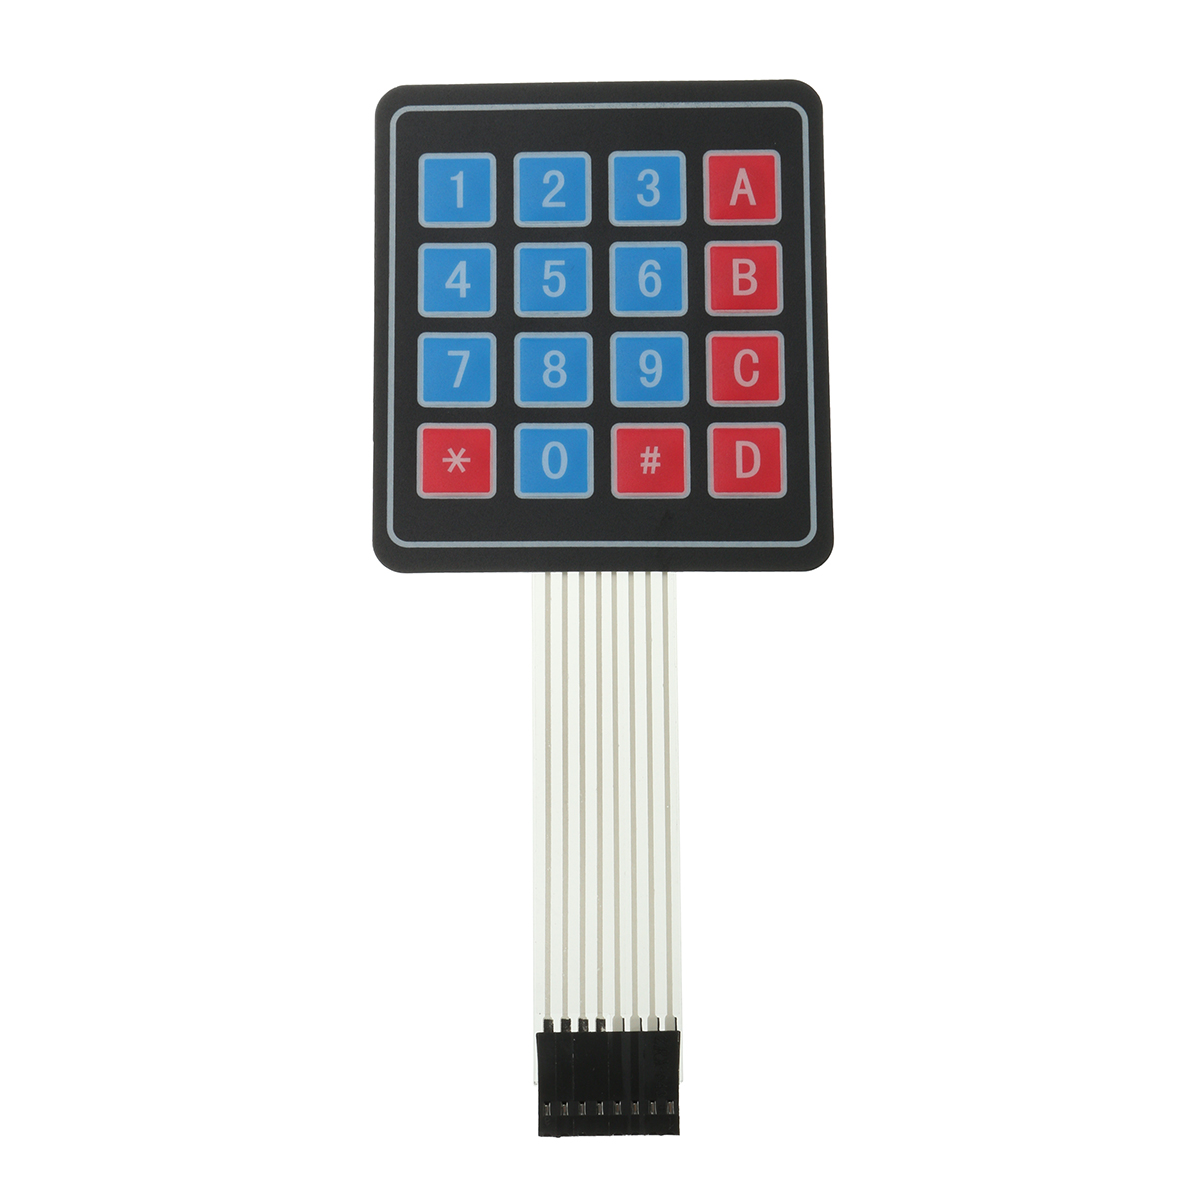 Find 4x4 Matrix Array 16 Key Membrane Switch Keypad Keyboard for Arduino/AVR for Sale on Gipsybee.com with cryptocurrencies